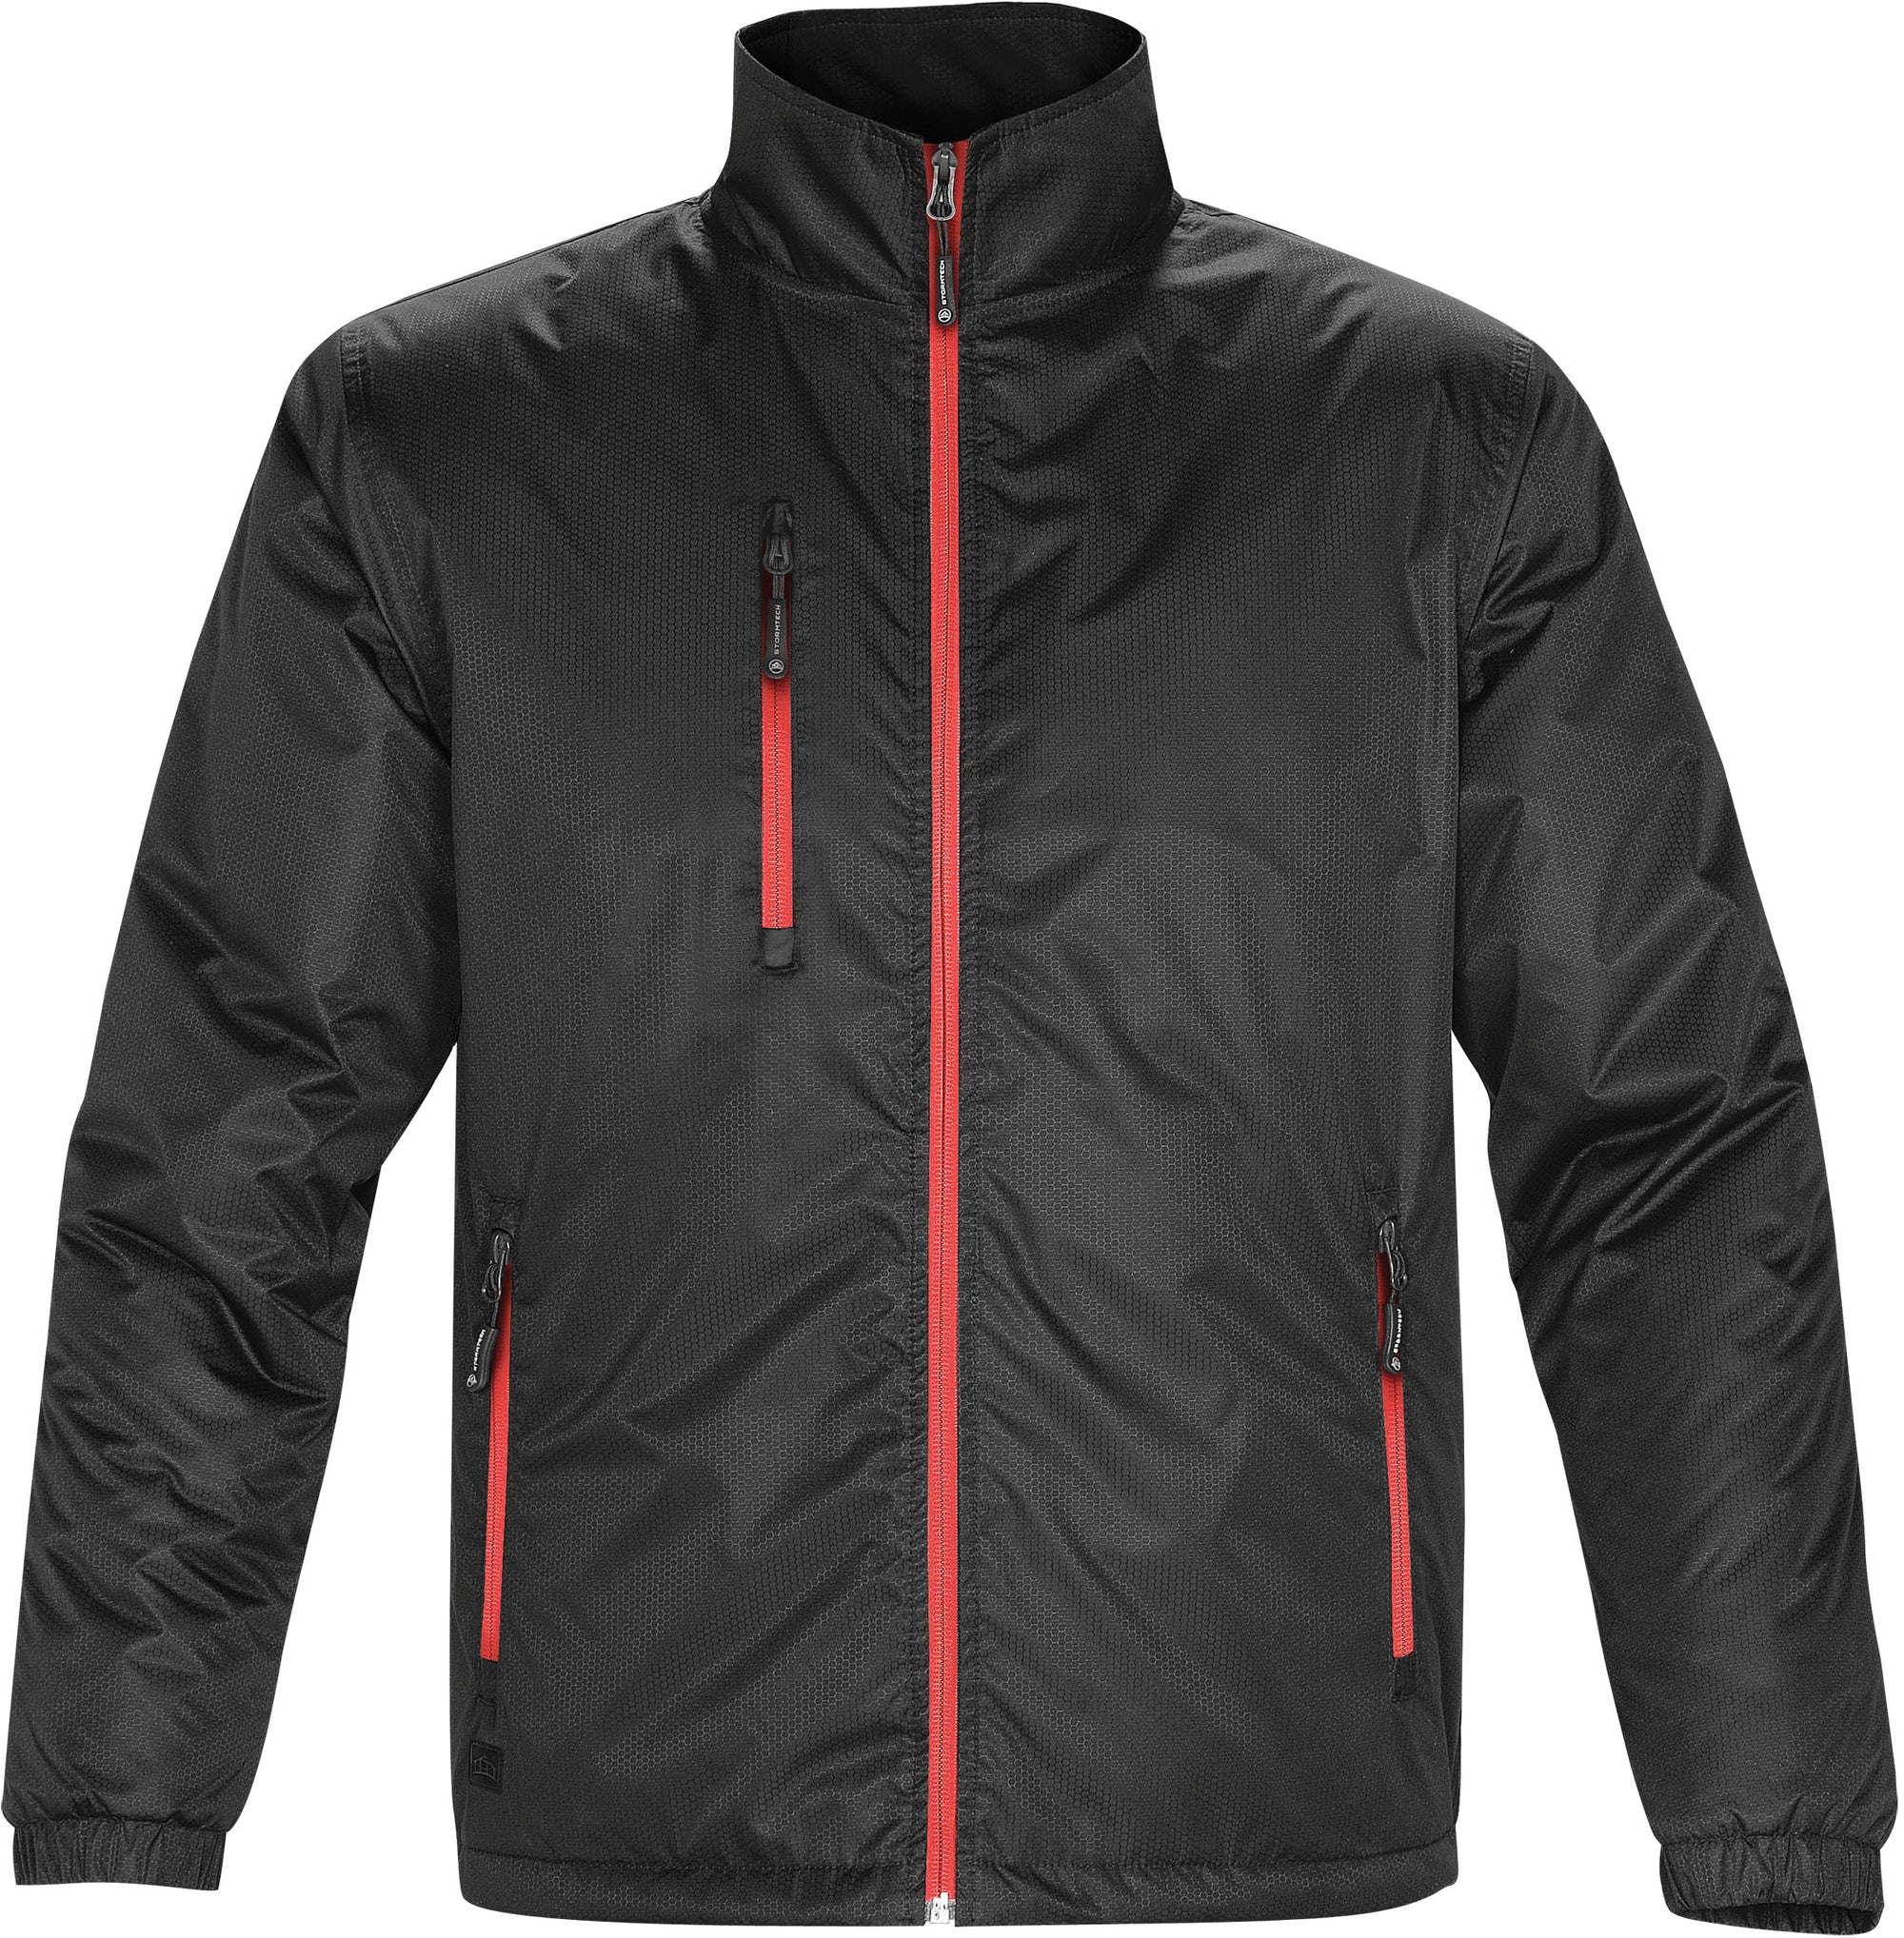 STORMTECH MEN'S AXIS THERMAL SHELL JACKET - ID Apparel